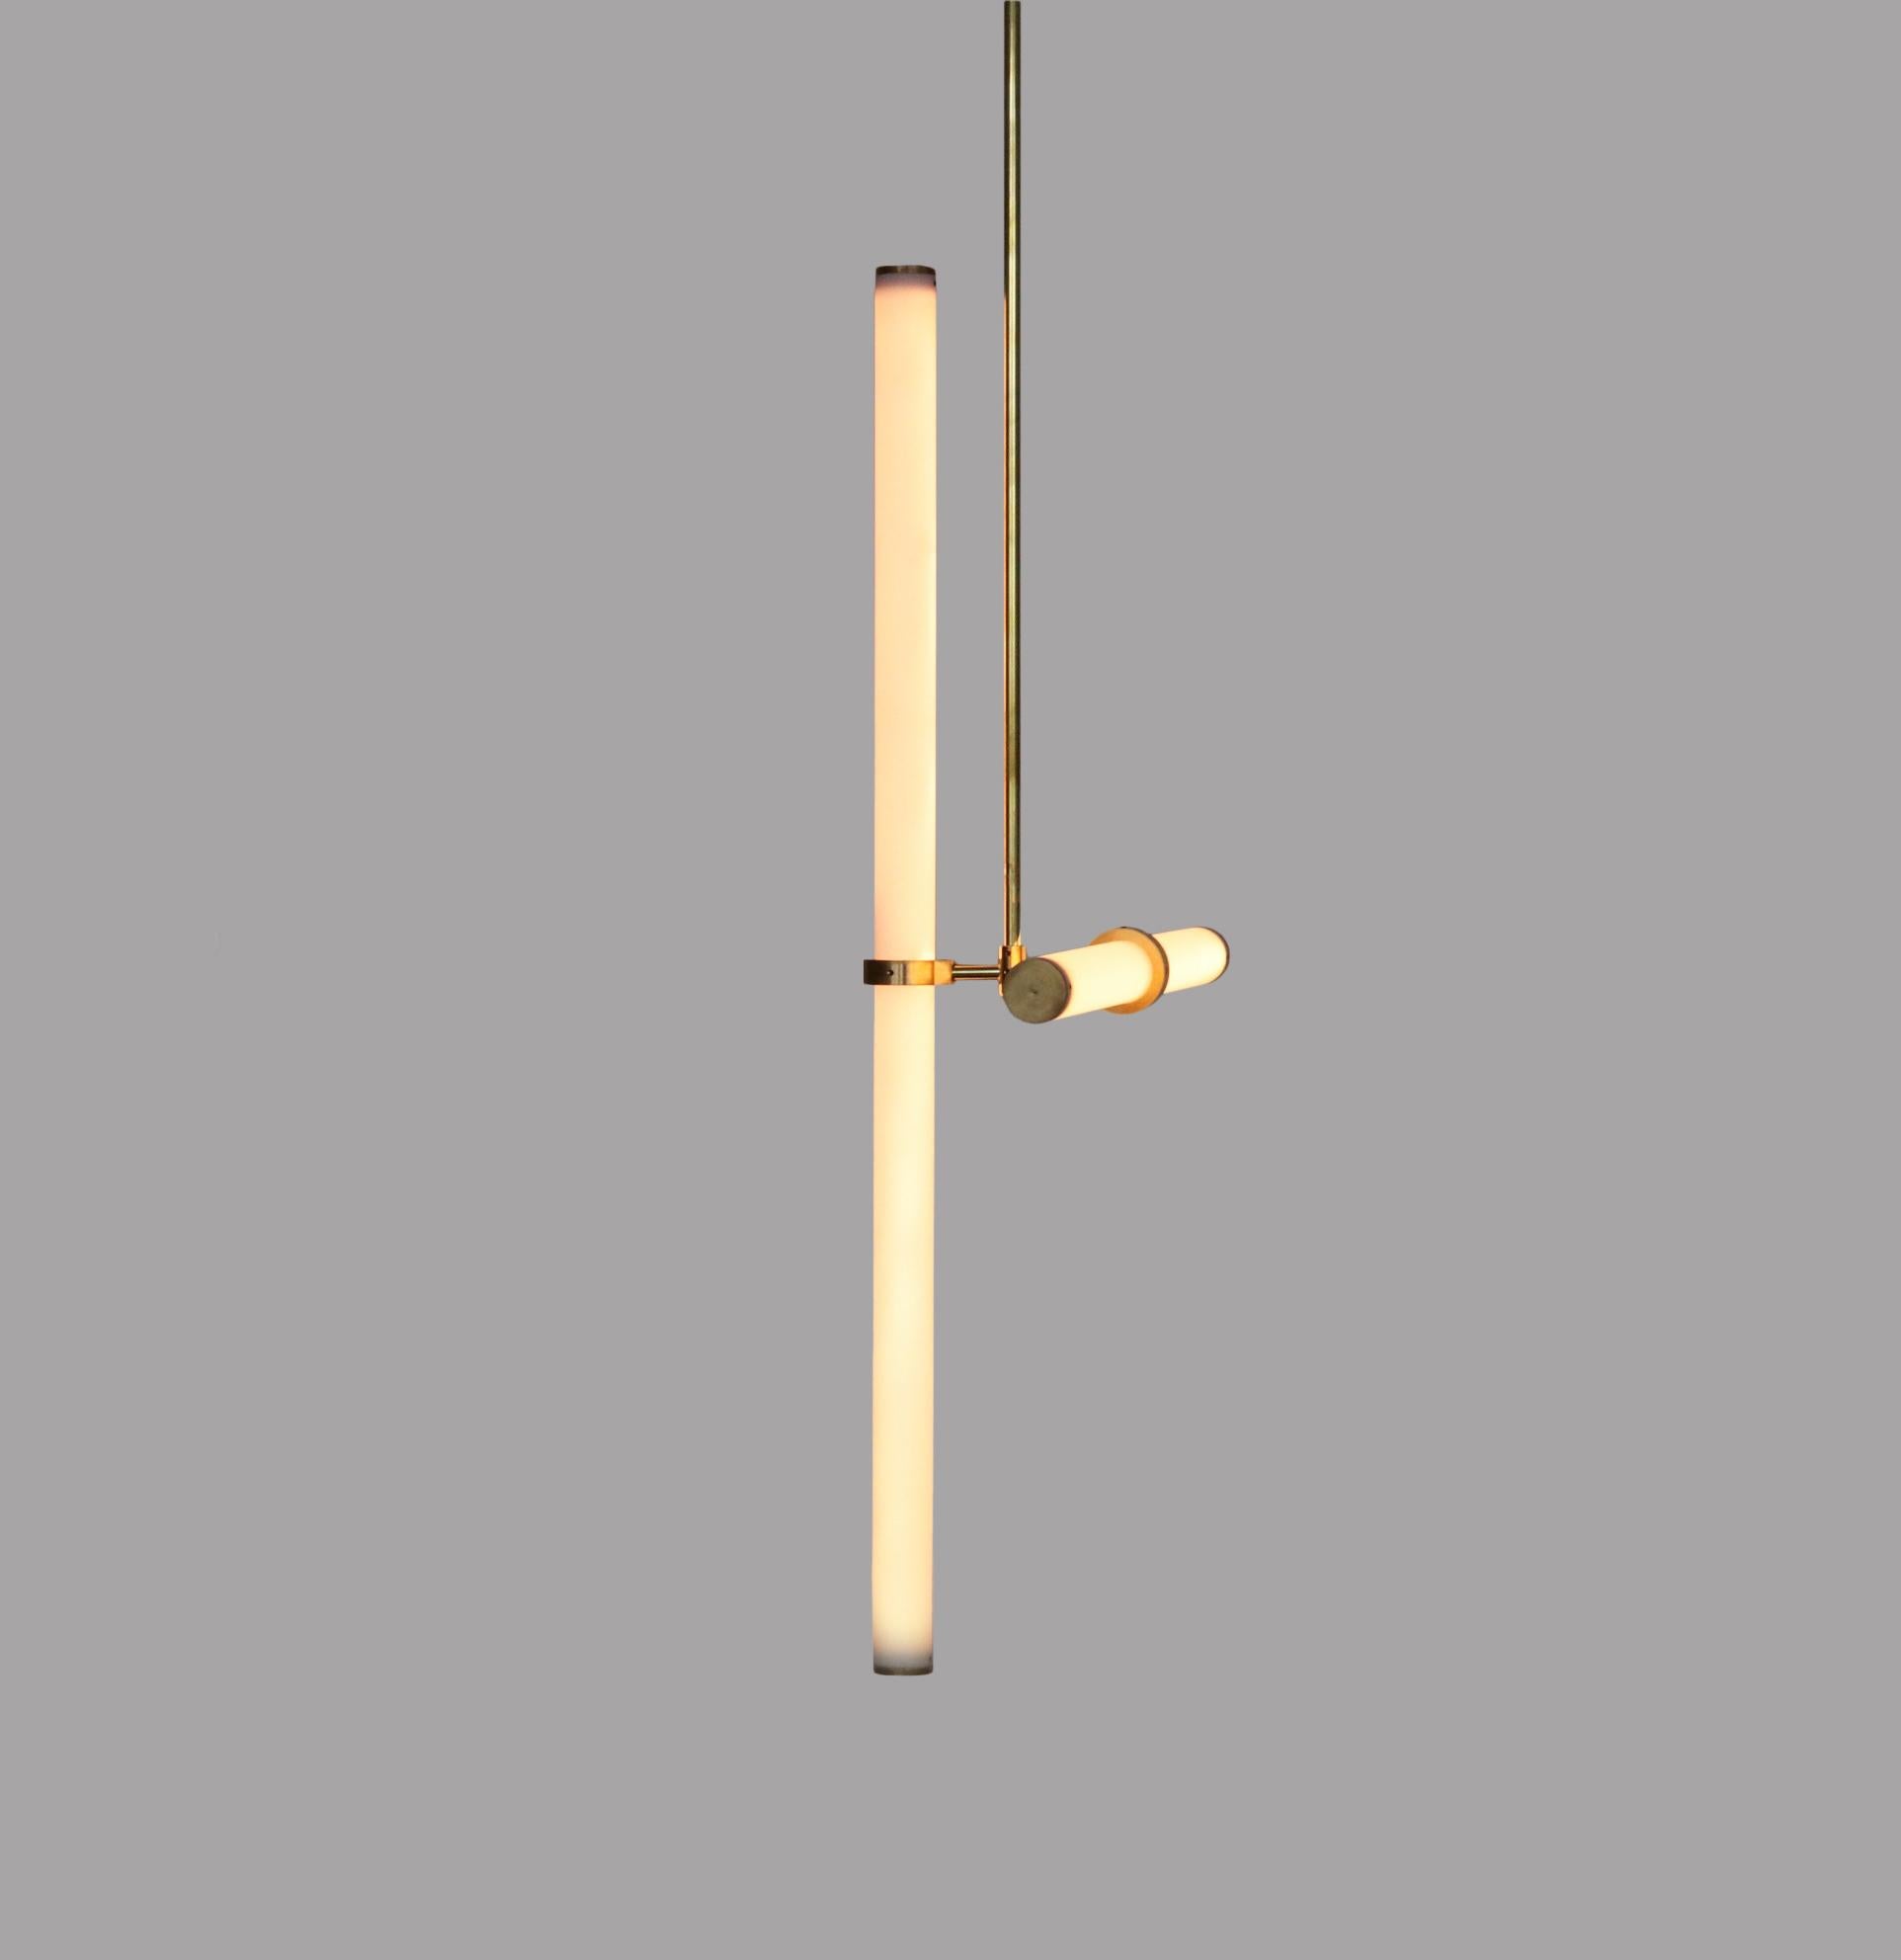 Pendant light object.
Beautiful with a clear presence, a light object that can fit in many
locations, in residences, restaurants or hotels.

Lead time: 8 weeks
Dimensions: 120 cm x 40 cm (height to order)
Materials: brass, acrylic tube, LED